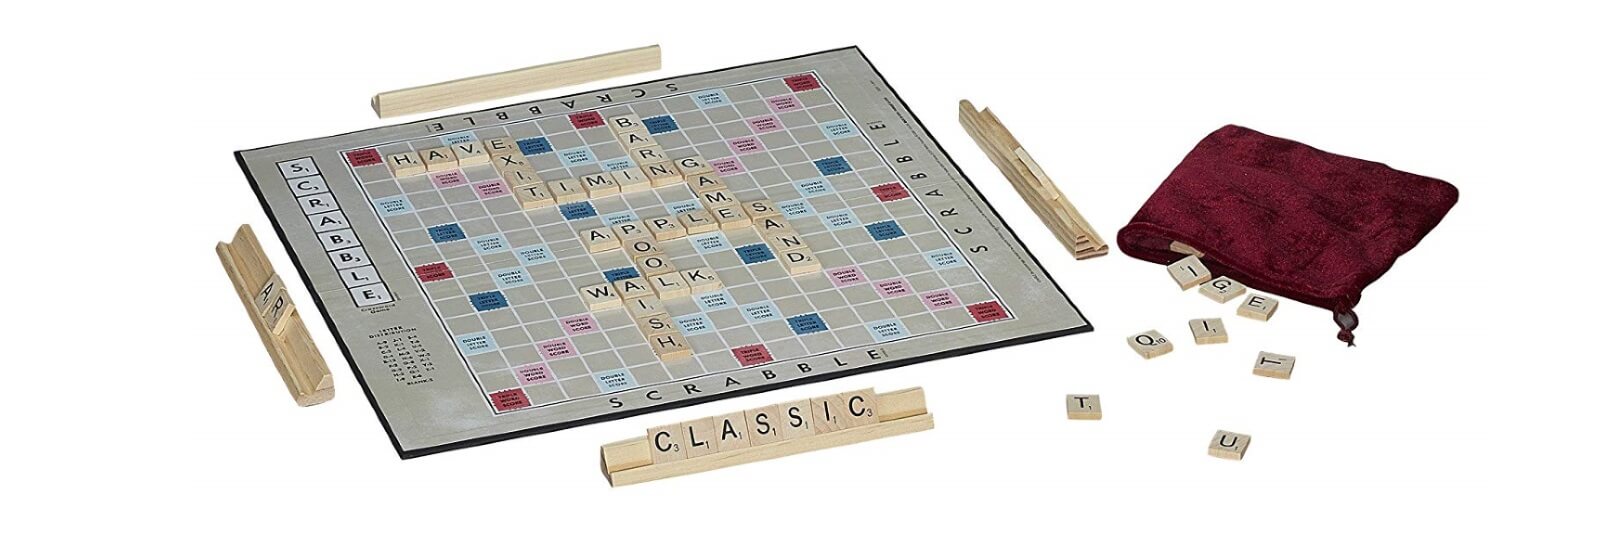 scrabble-board-game-review-rules-instructions